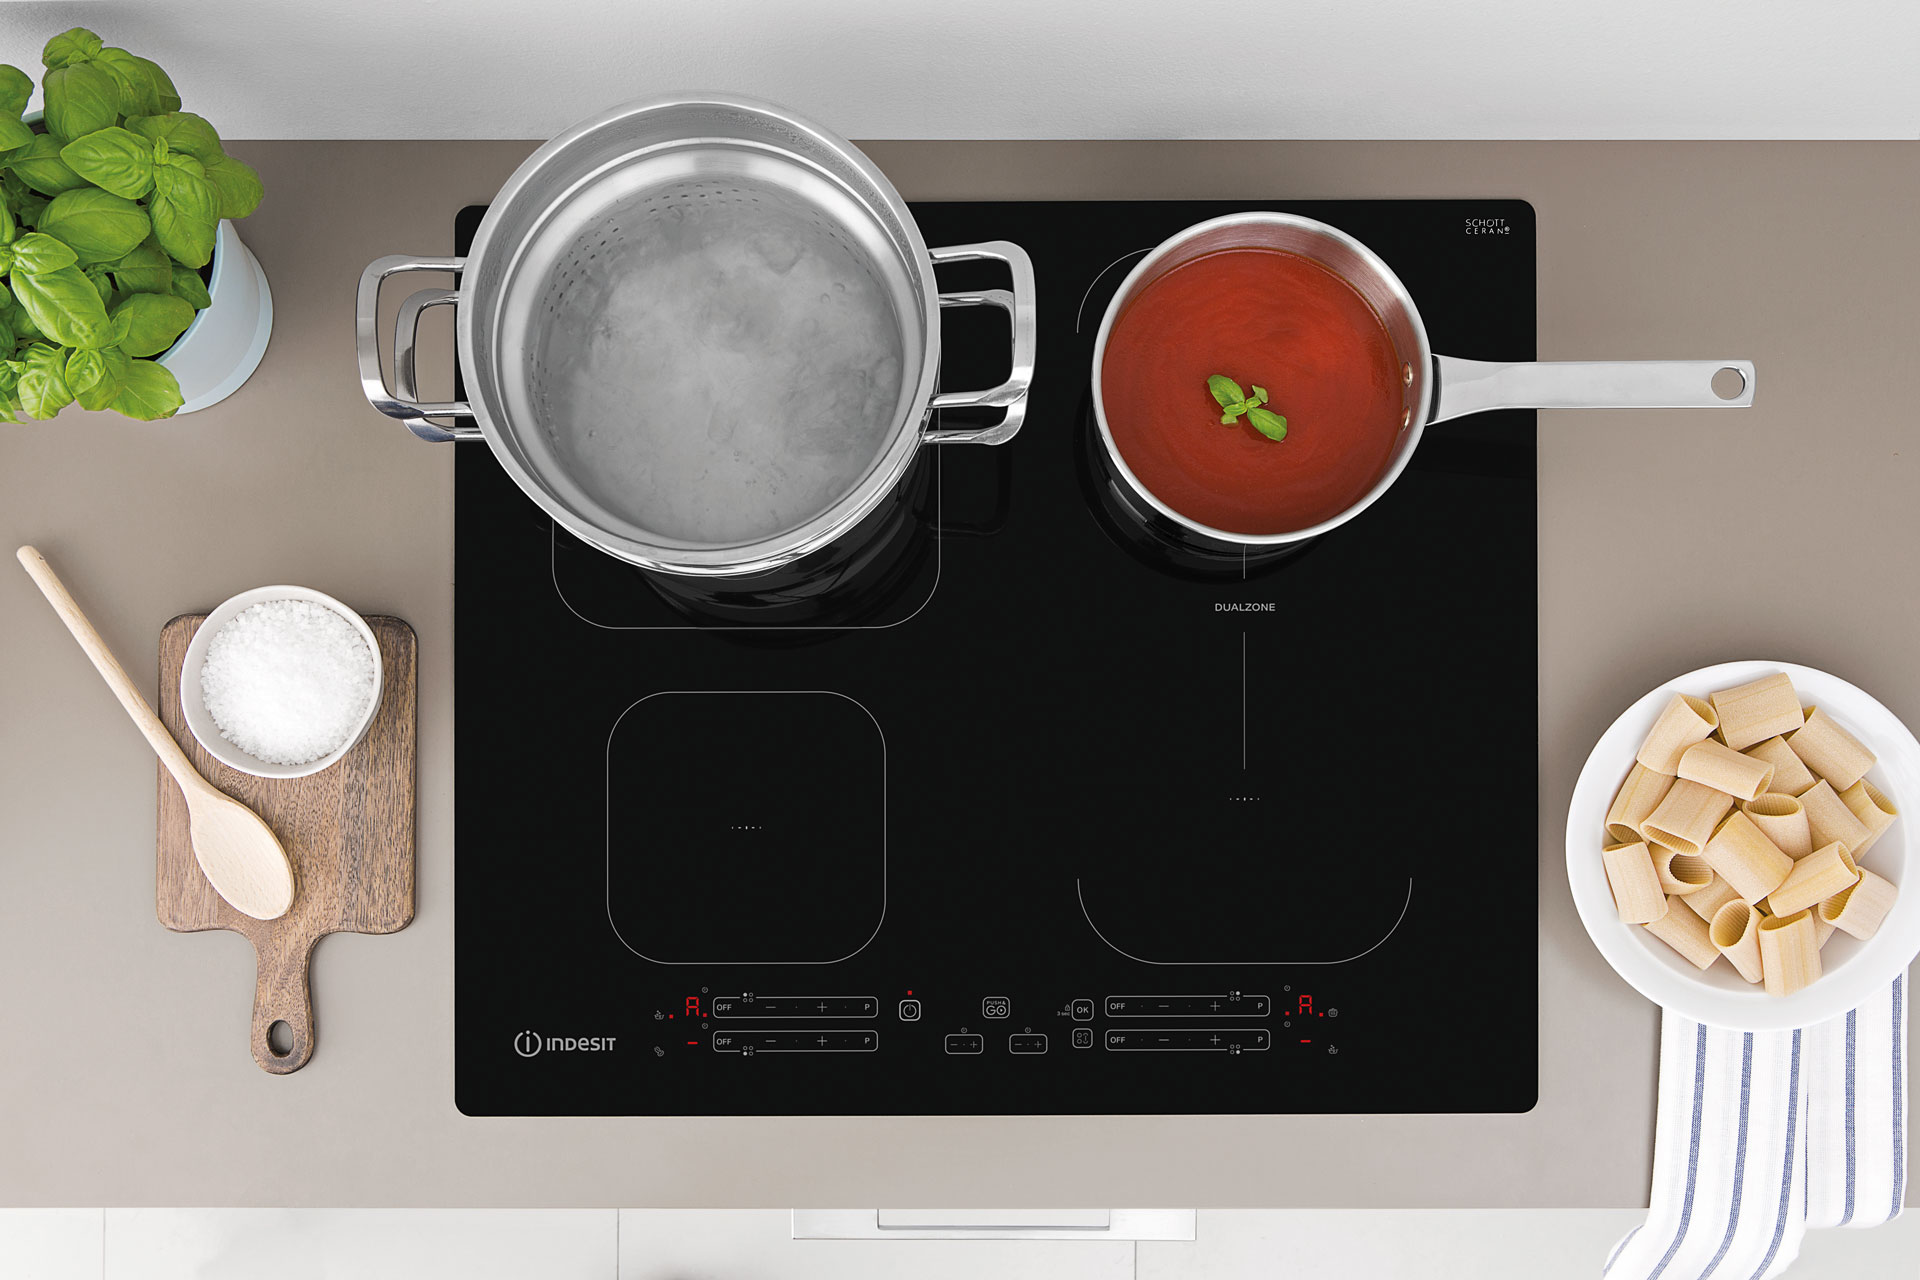 Indesit Push&Go induction hobs: efficient, practical and reliable